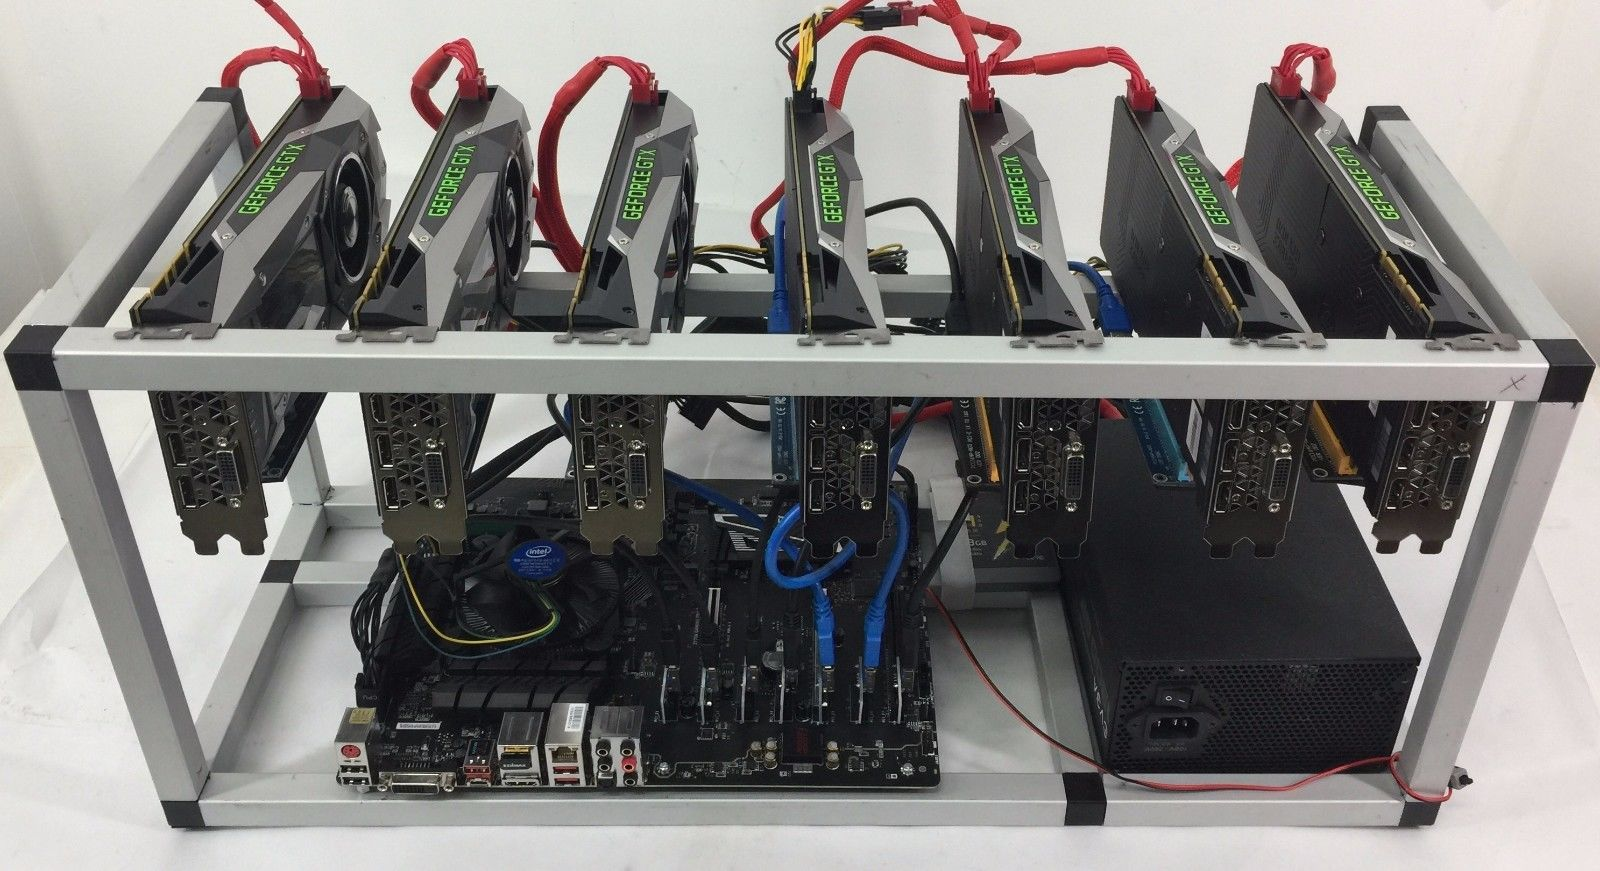 How to make a cheap bitcoin mining rig